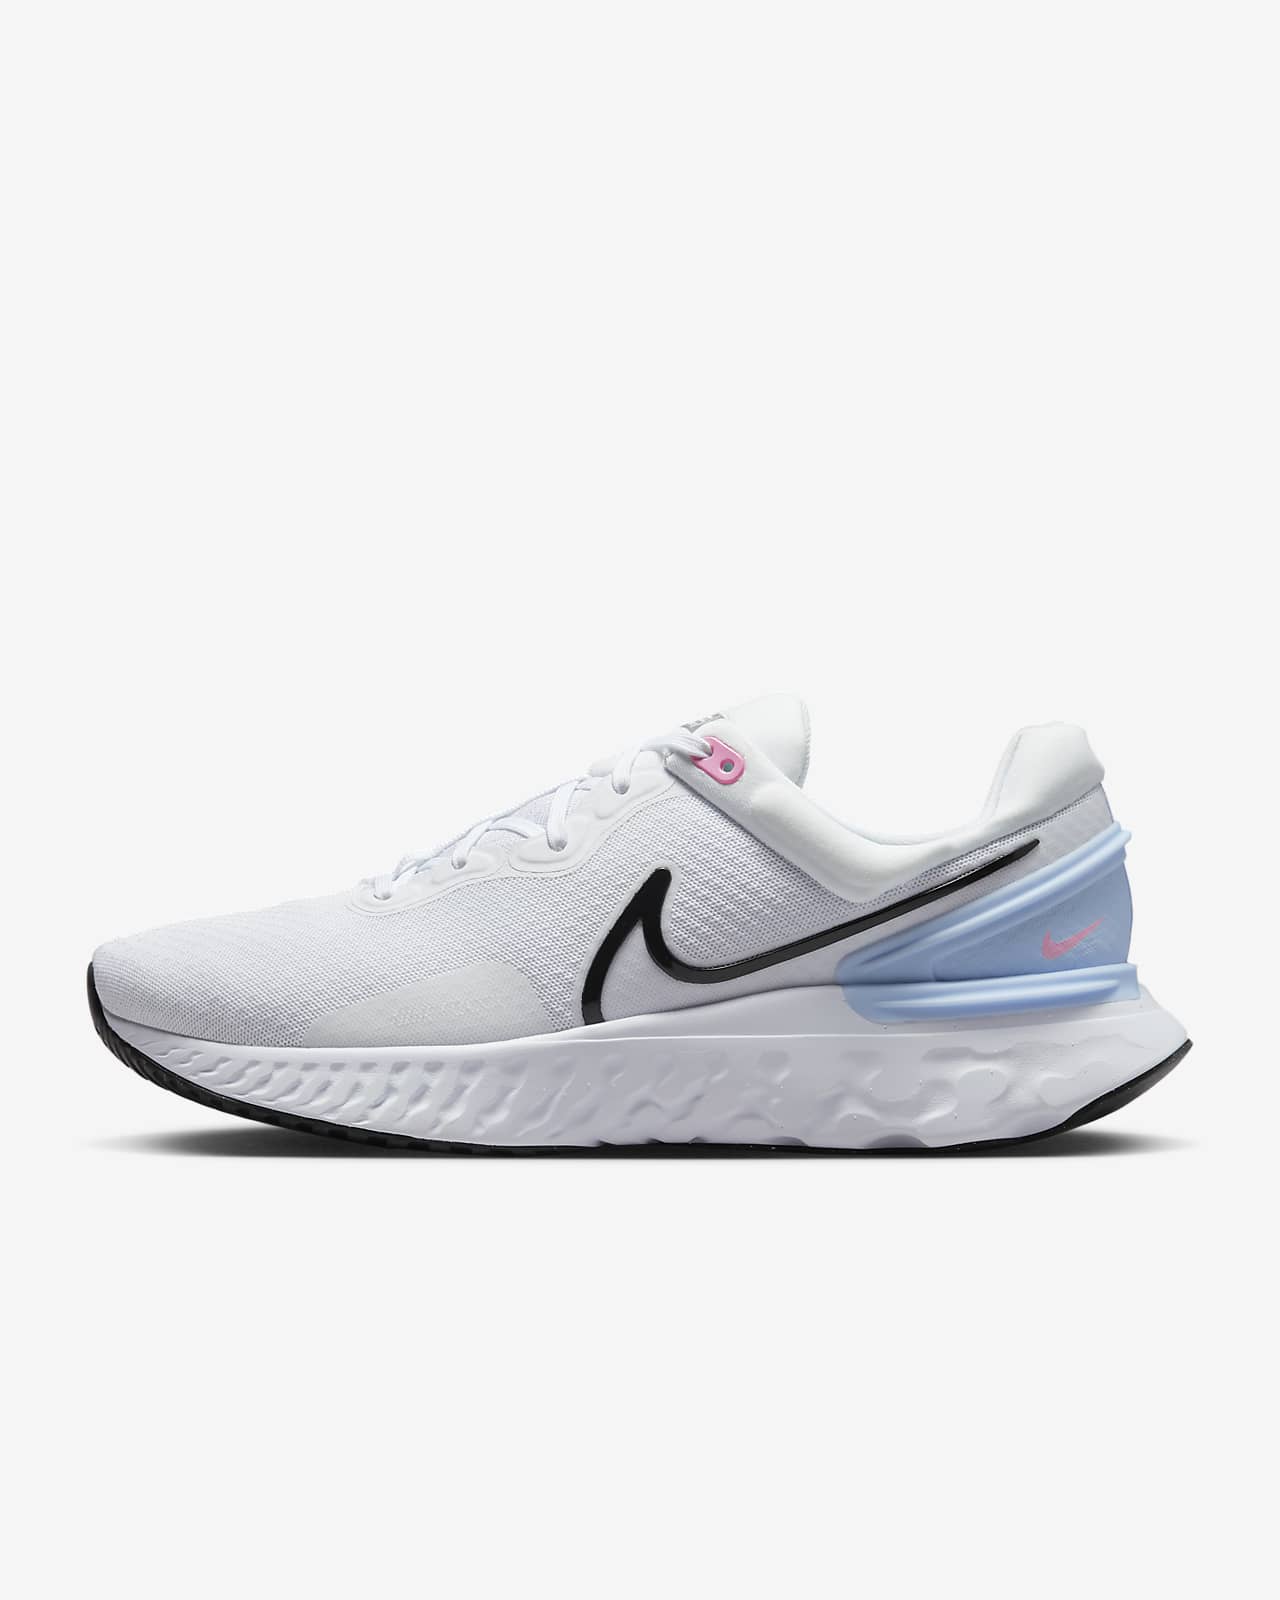 nike running shoes for men india